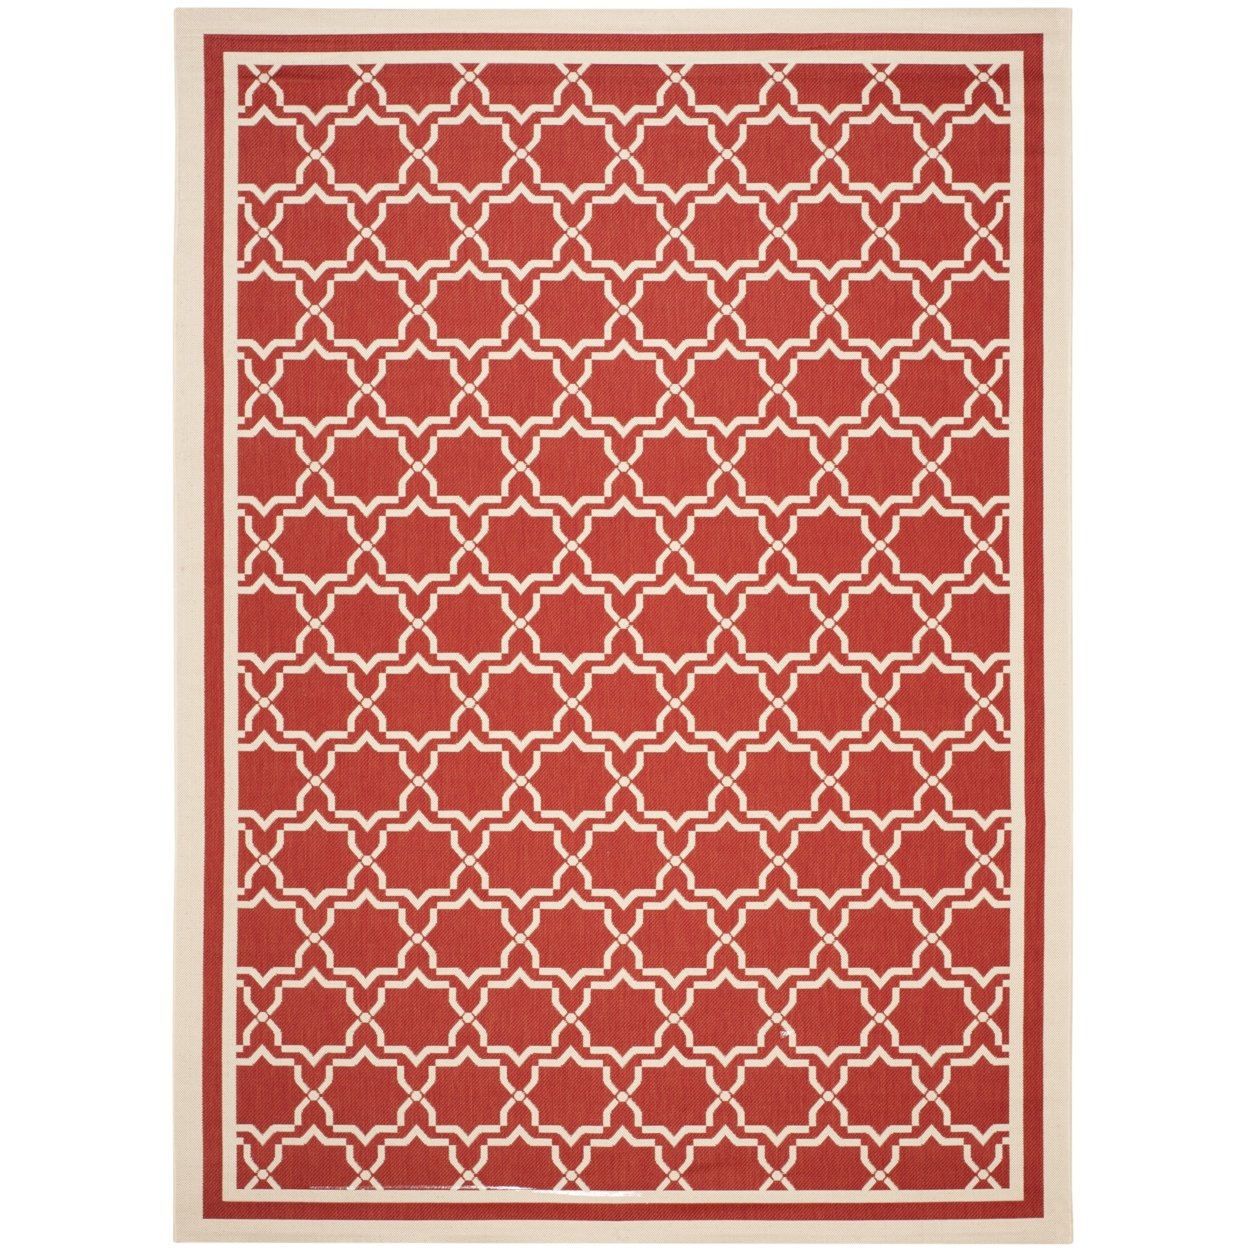 SAFAVIEH Outdoor CY6916-248 Courtyard Collection Red / Bone Rug - 9' X 12'